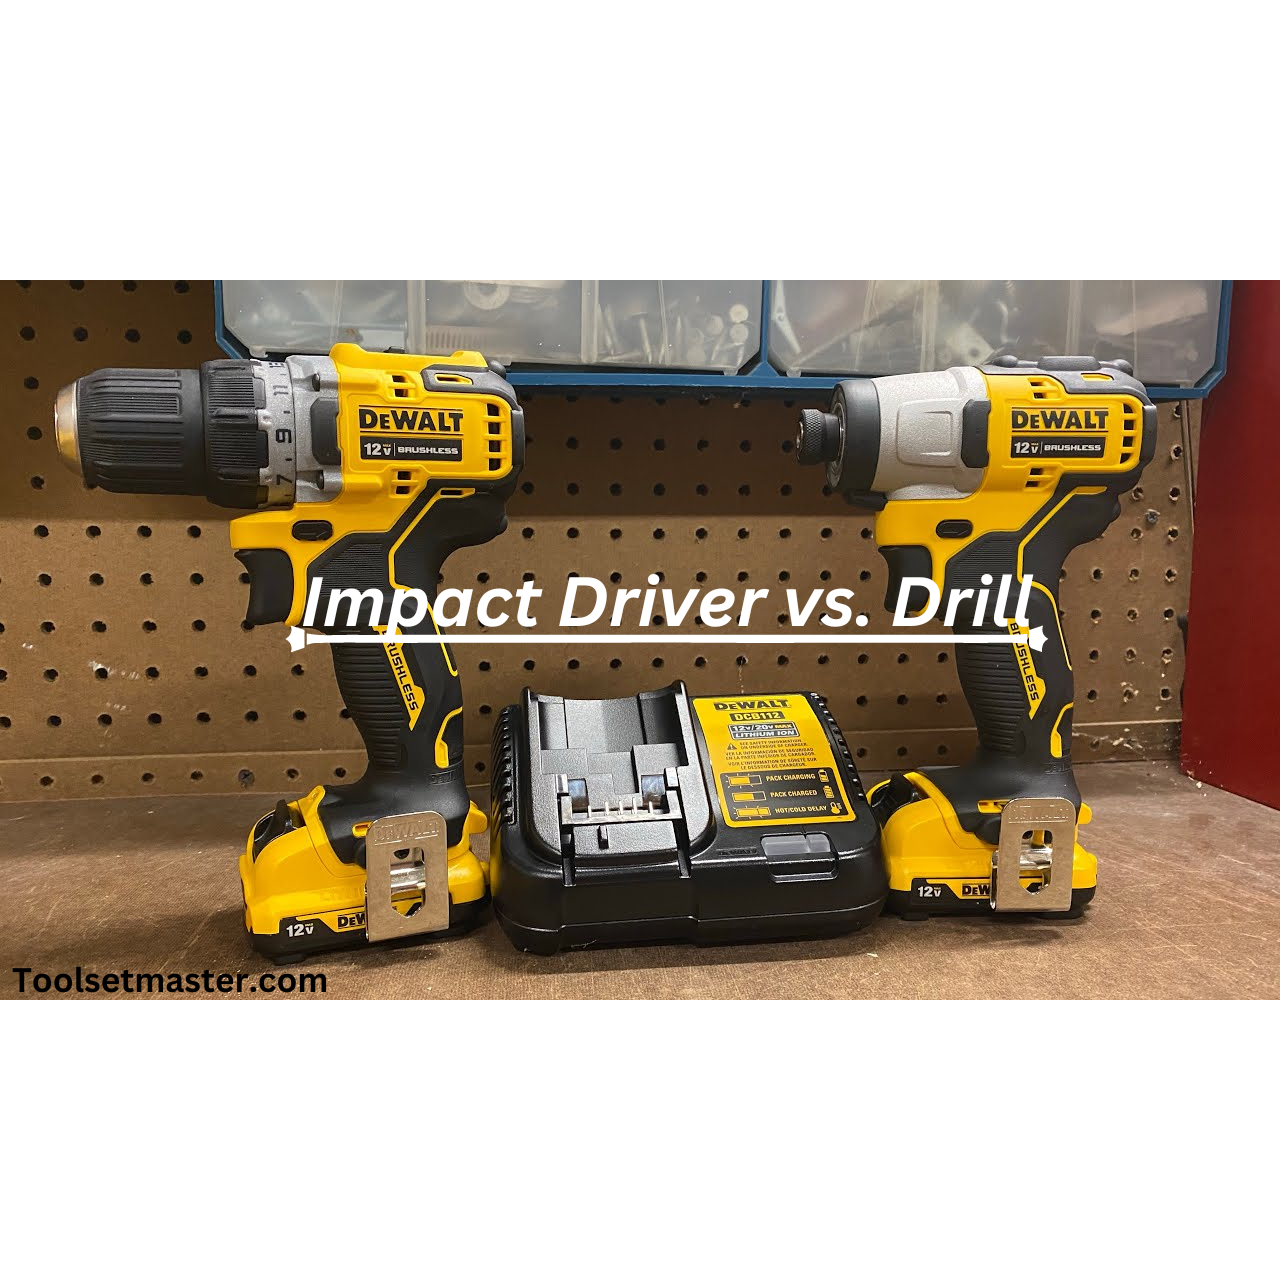 Impact Driver vs. Drill: Which Should You Choose for Your Projects